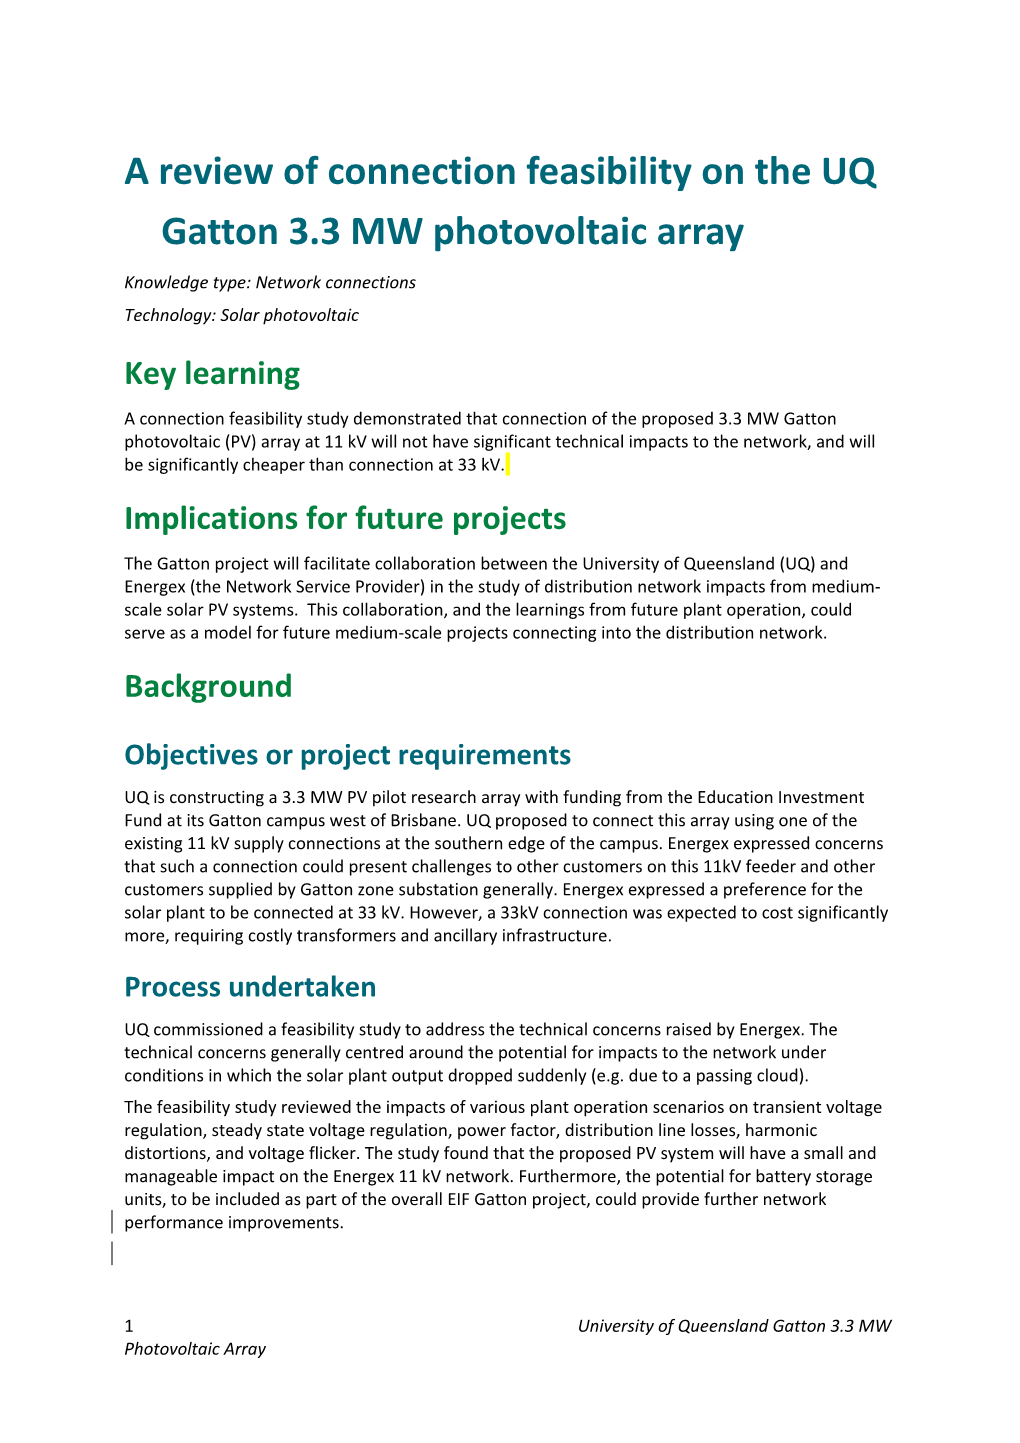 A Review of Connection Feasibility on the UQ Gatton 3.3 MW Photovoltaic Array